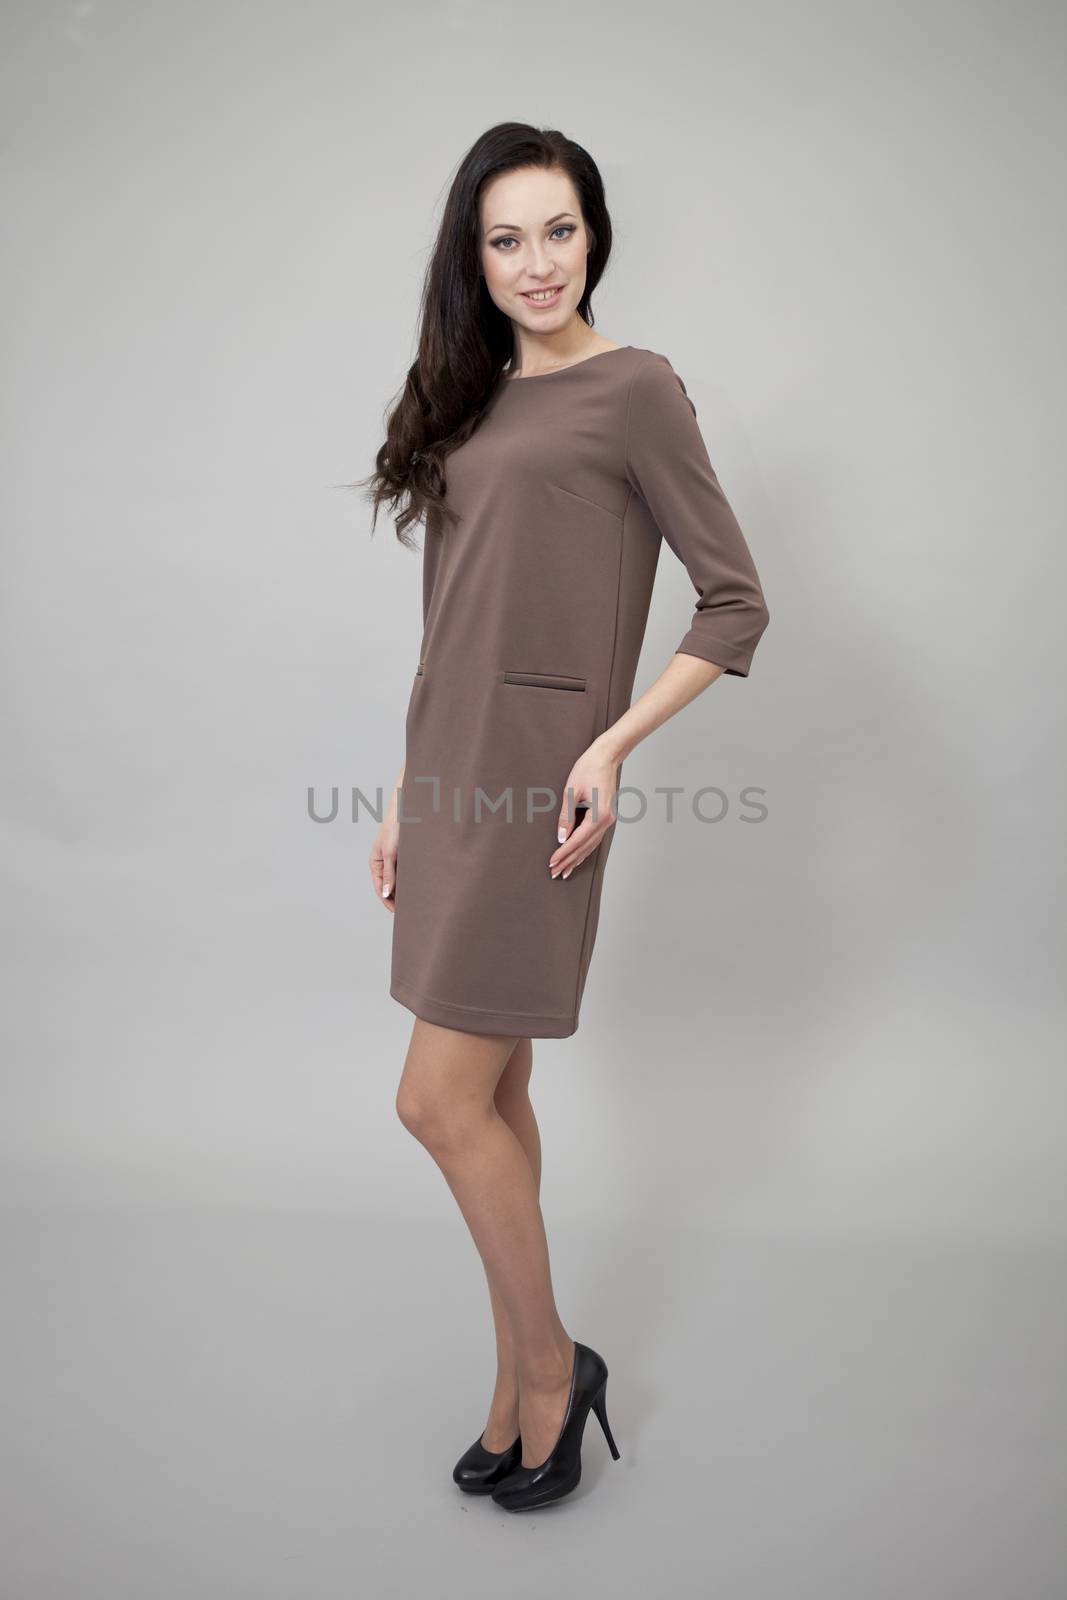 Young beautiful caucasian brunette in fashion dress posing on grey background